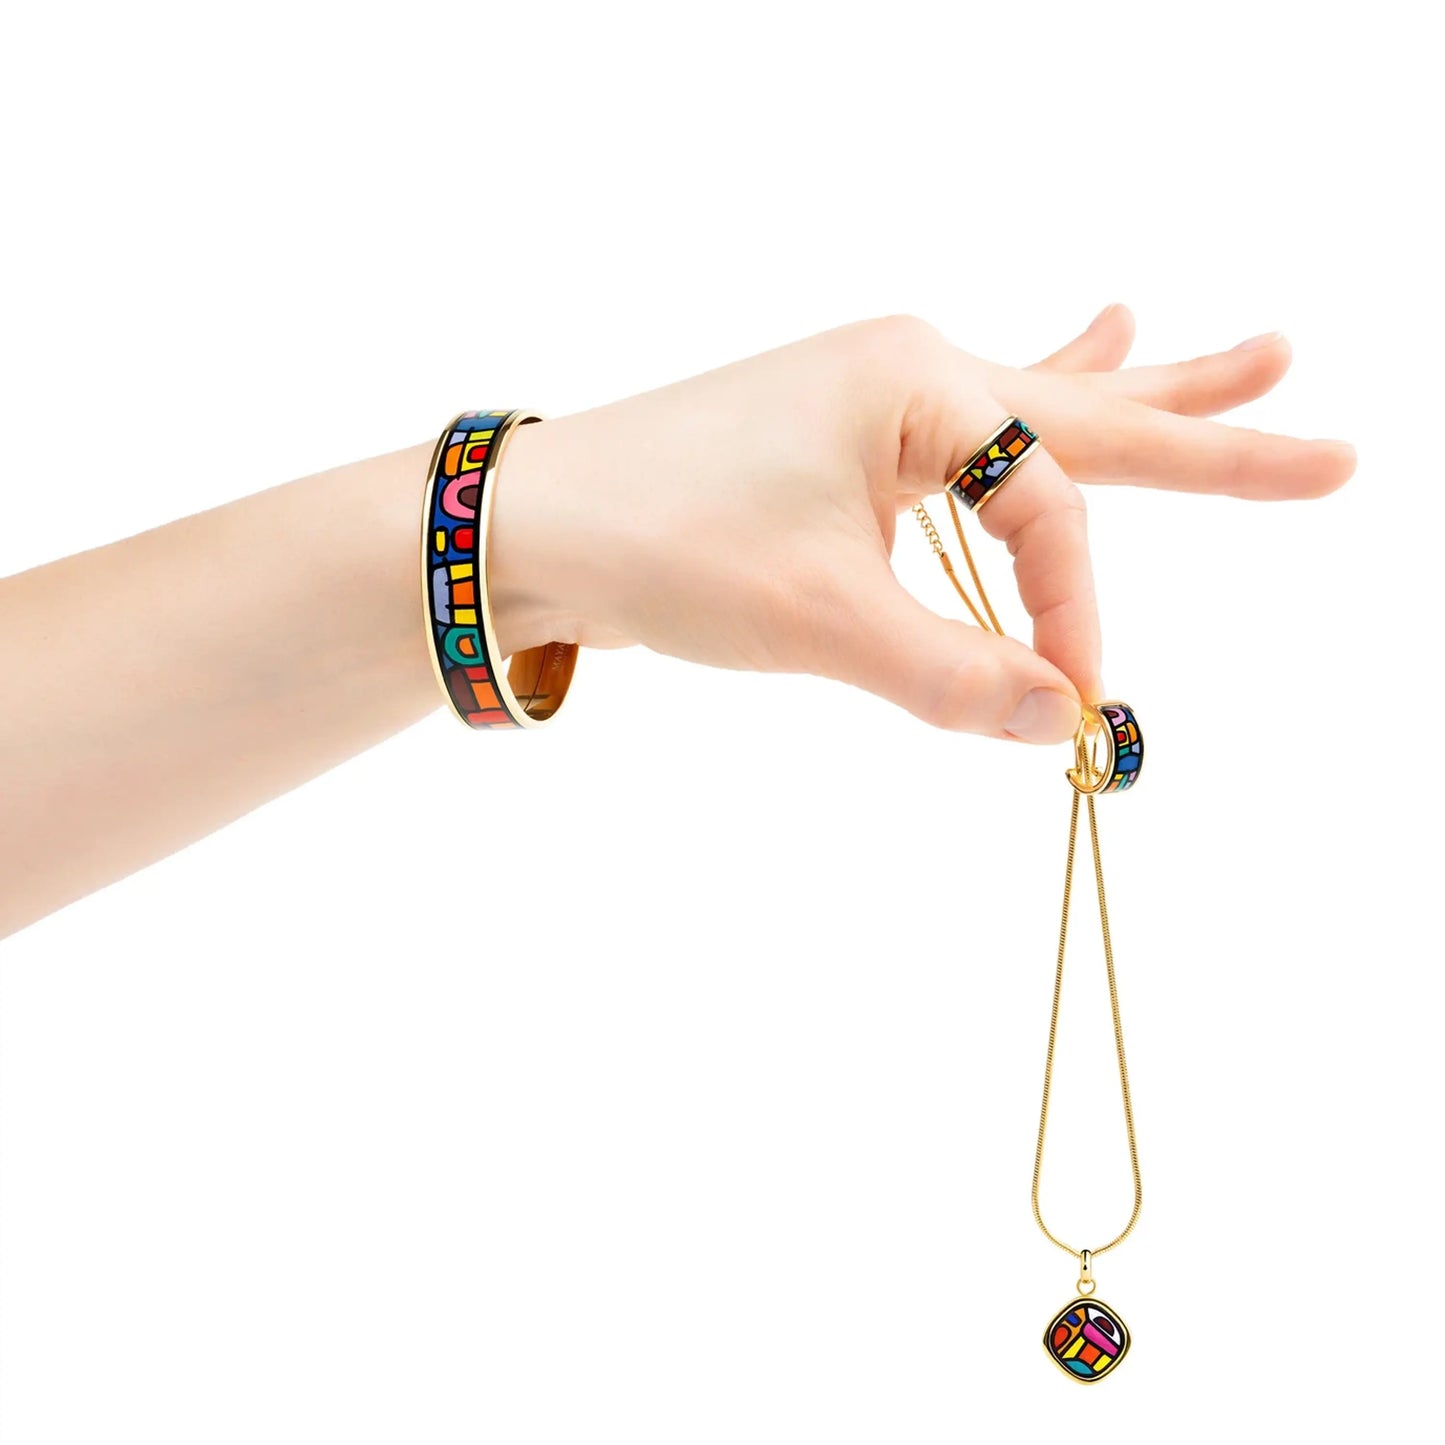 Hand with a bracelet and a ring are holding earrings and a necklace from the Spanish Nights collection